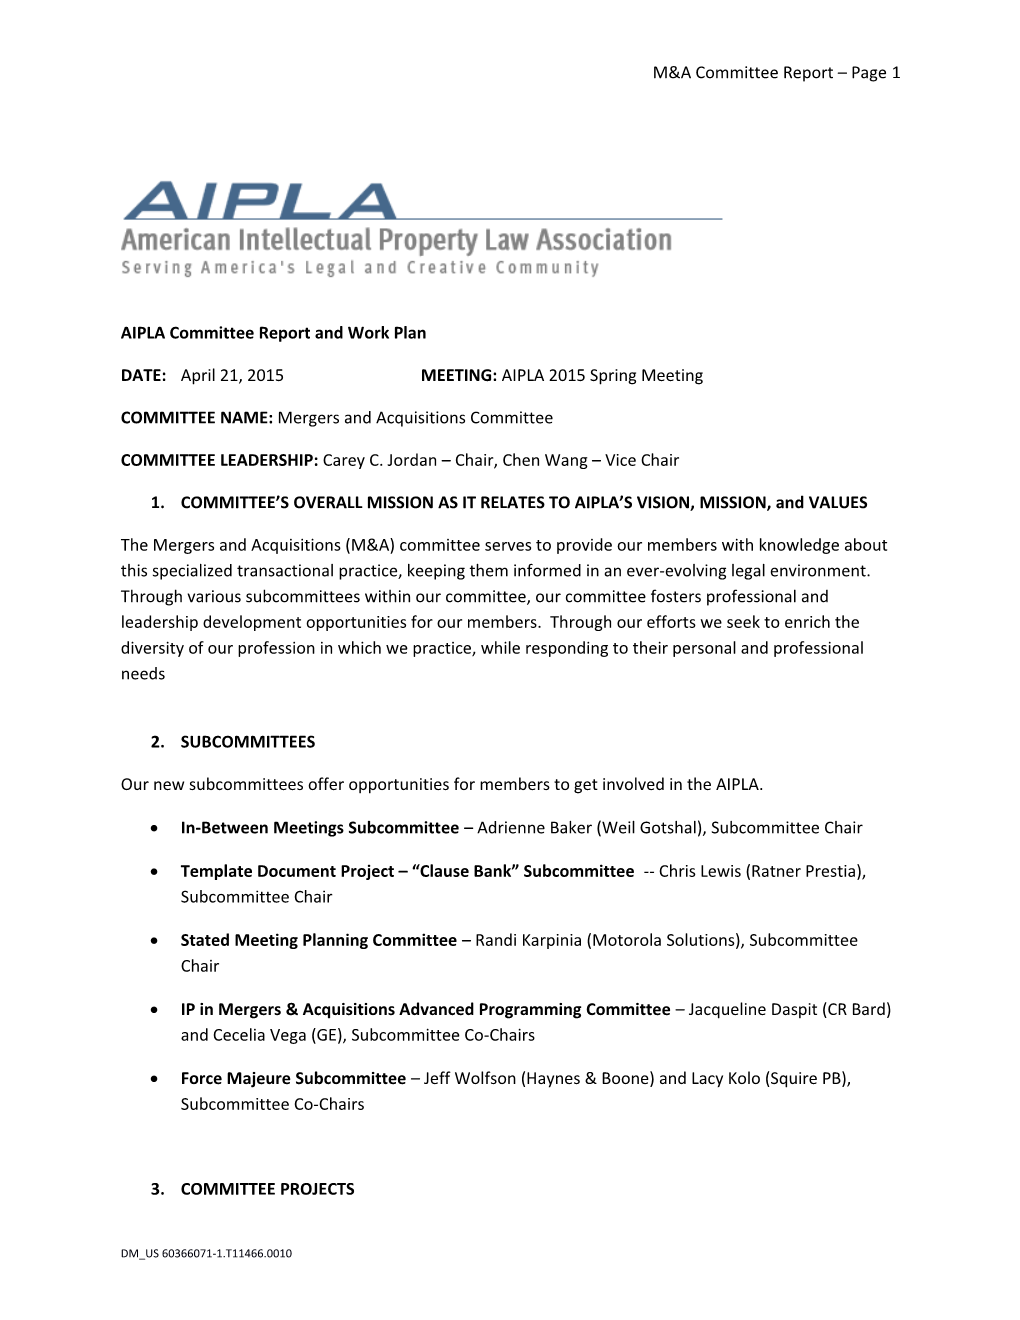 AIPLA Committee Report and Work Plan s1